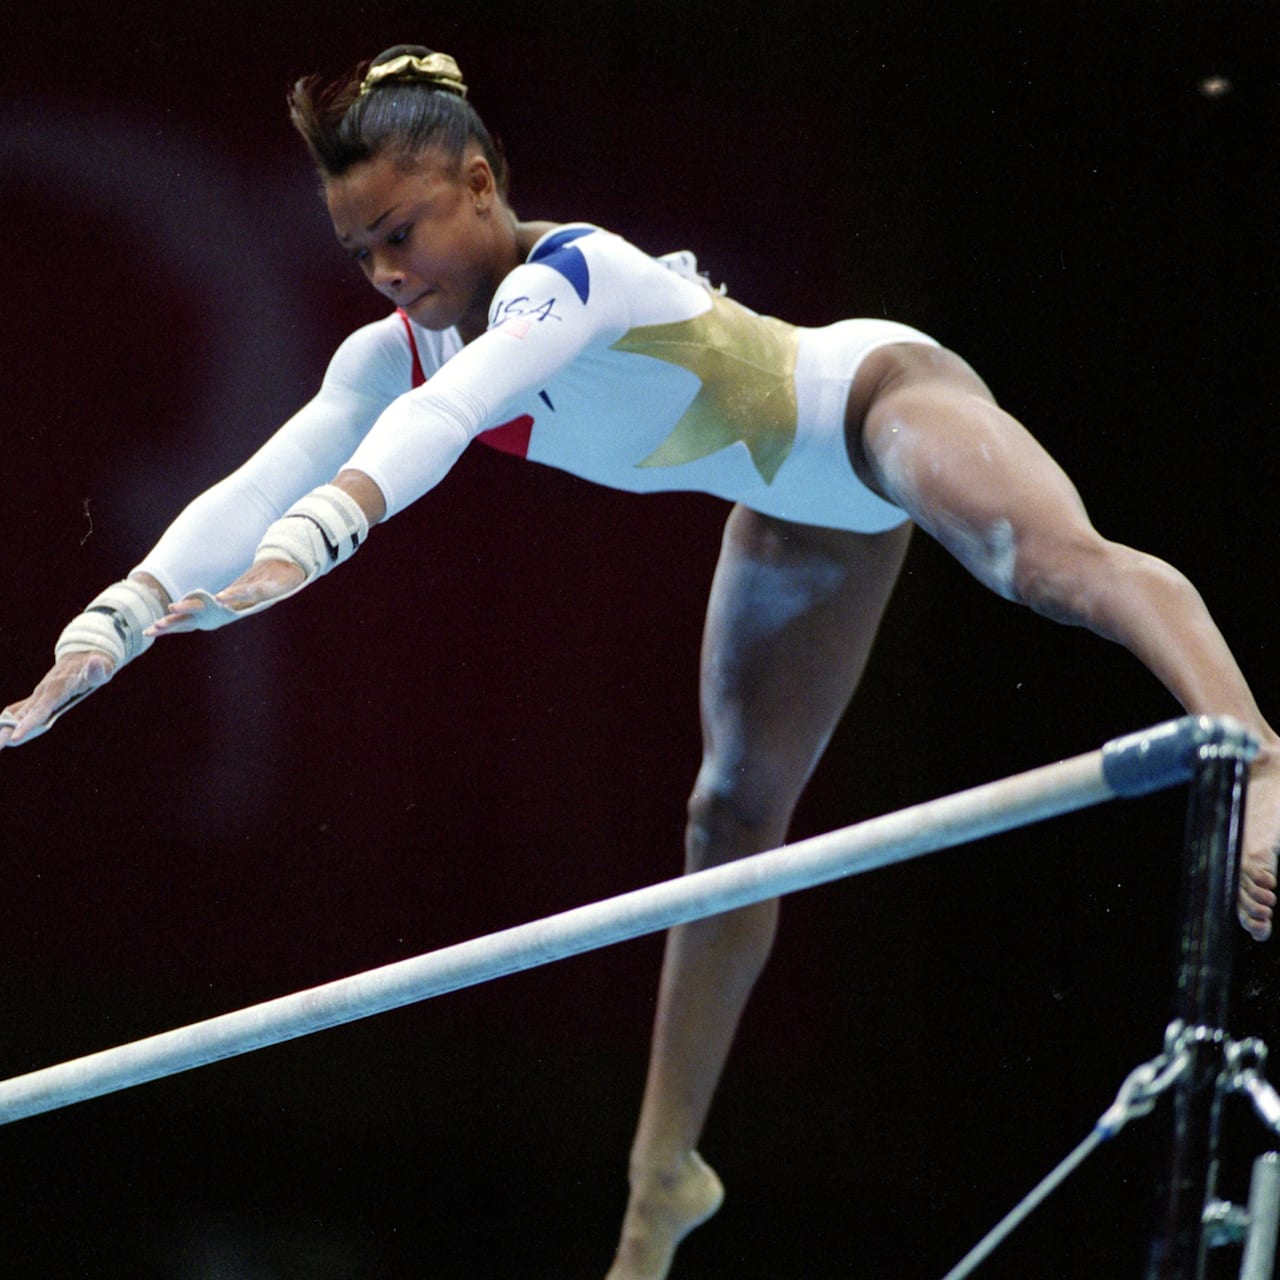 Dominique Dawes' Guide to Watching Gymnastics, Arts & Culture